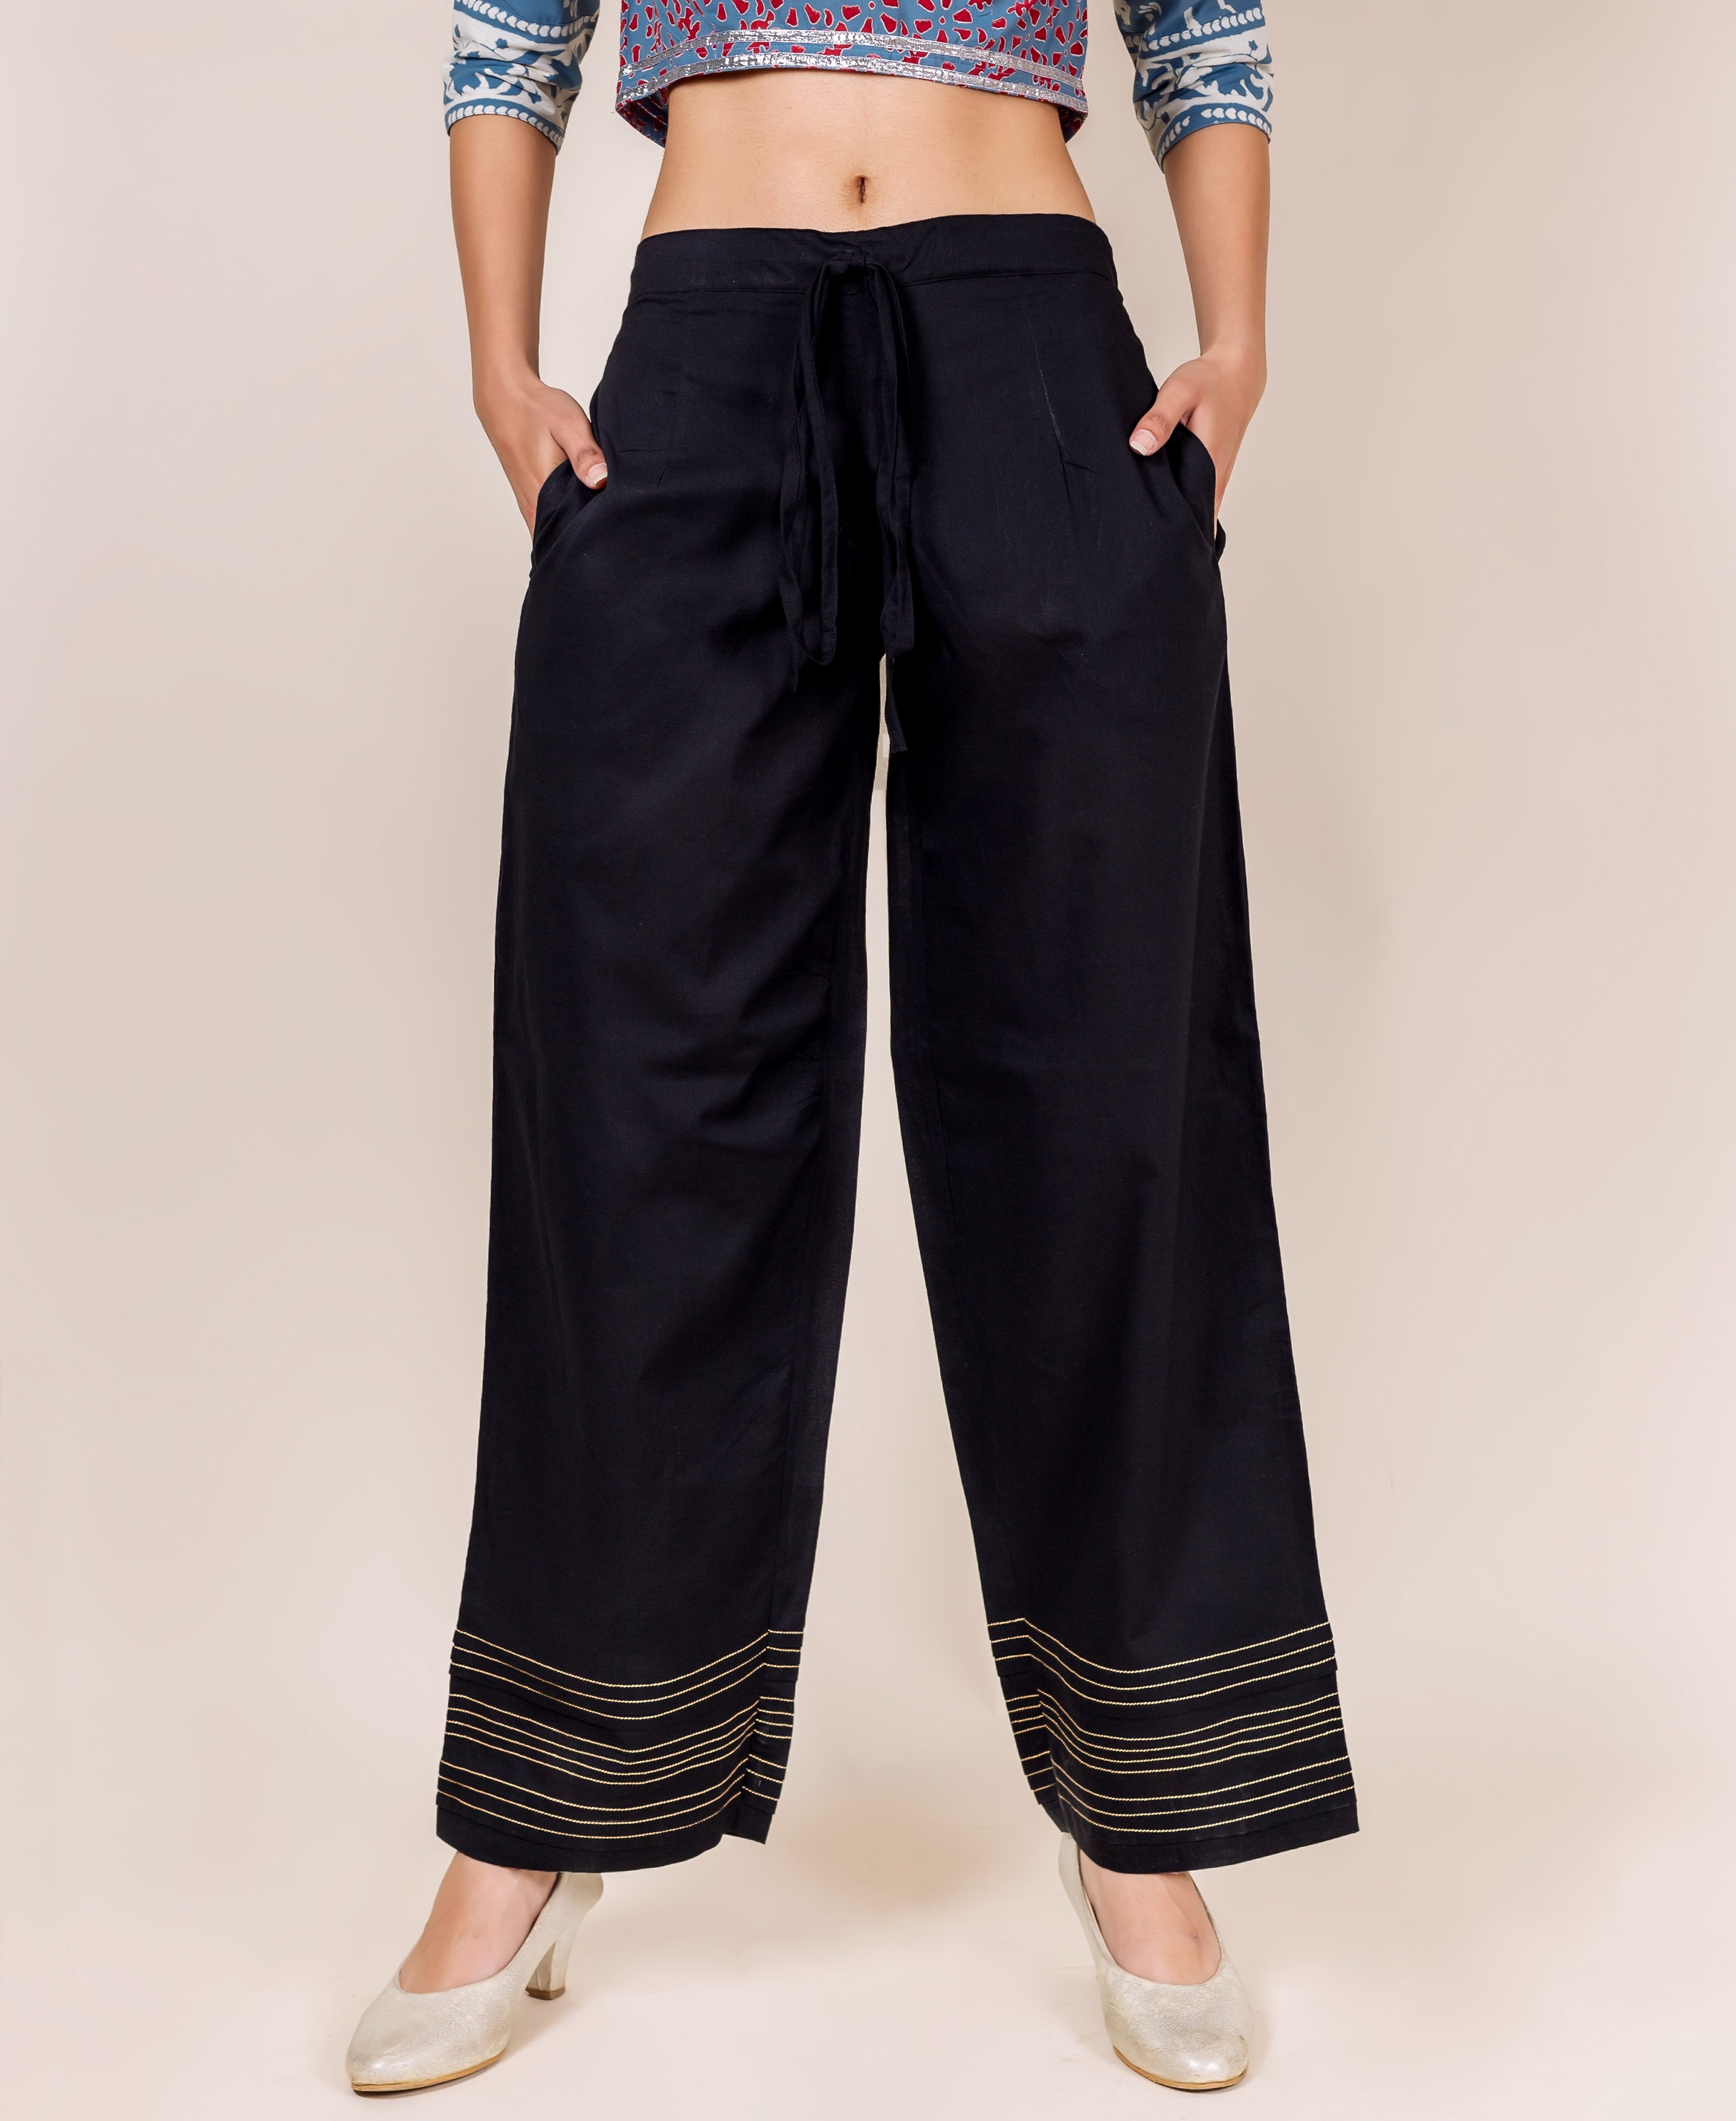 How To Style Palazzo Pants for Work or Play  Write Styles